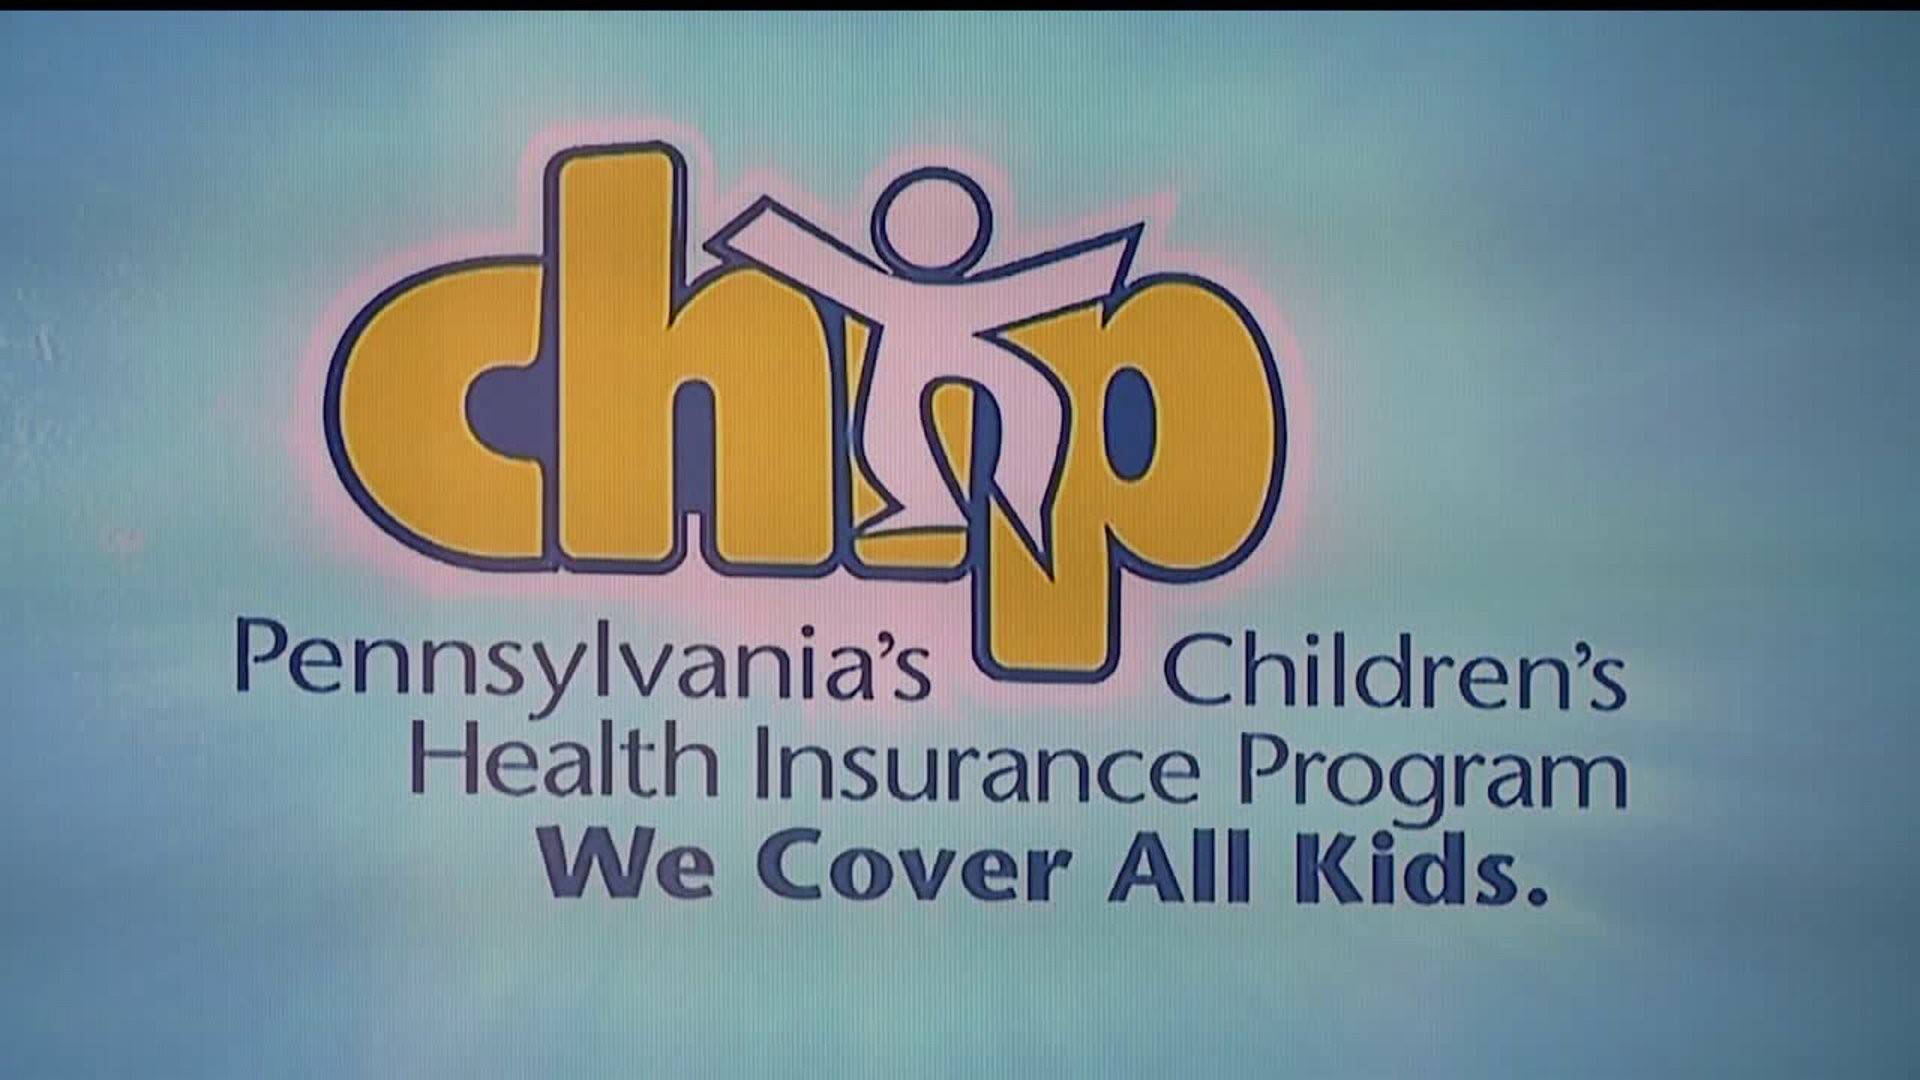 Thousands of children in Pa. could be uninsured if CHIP not renewed